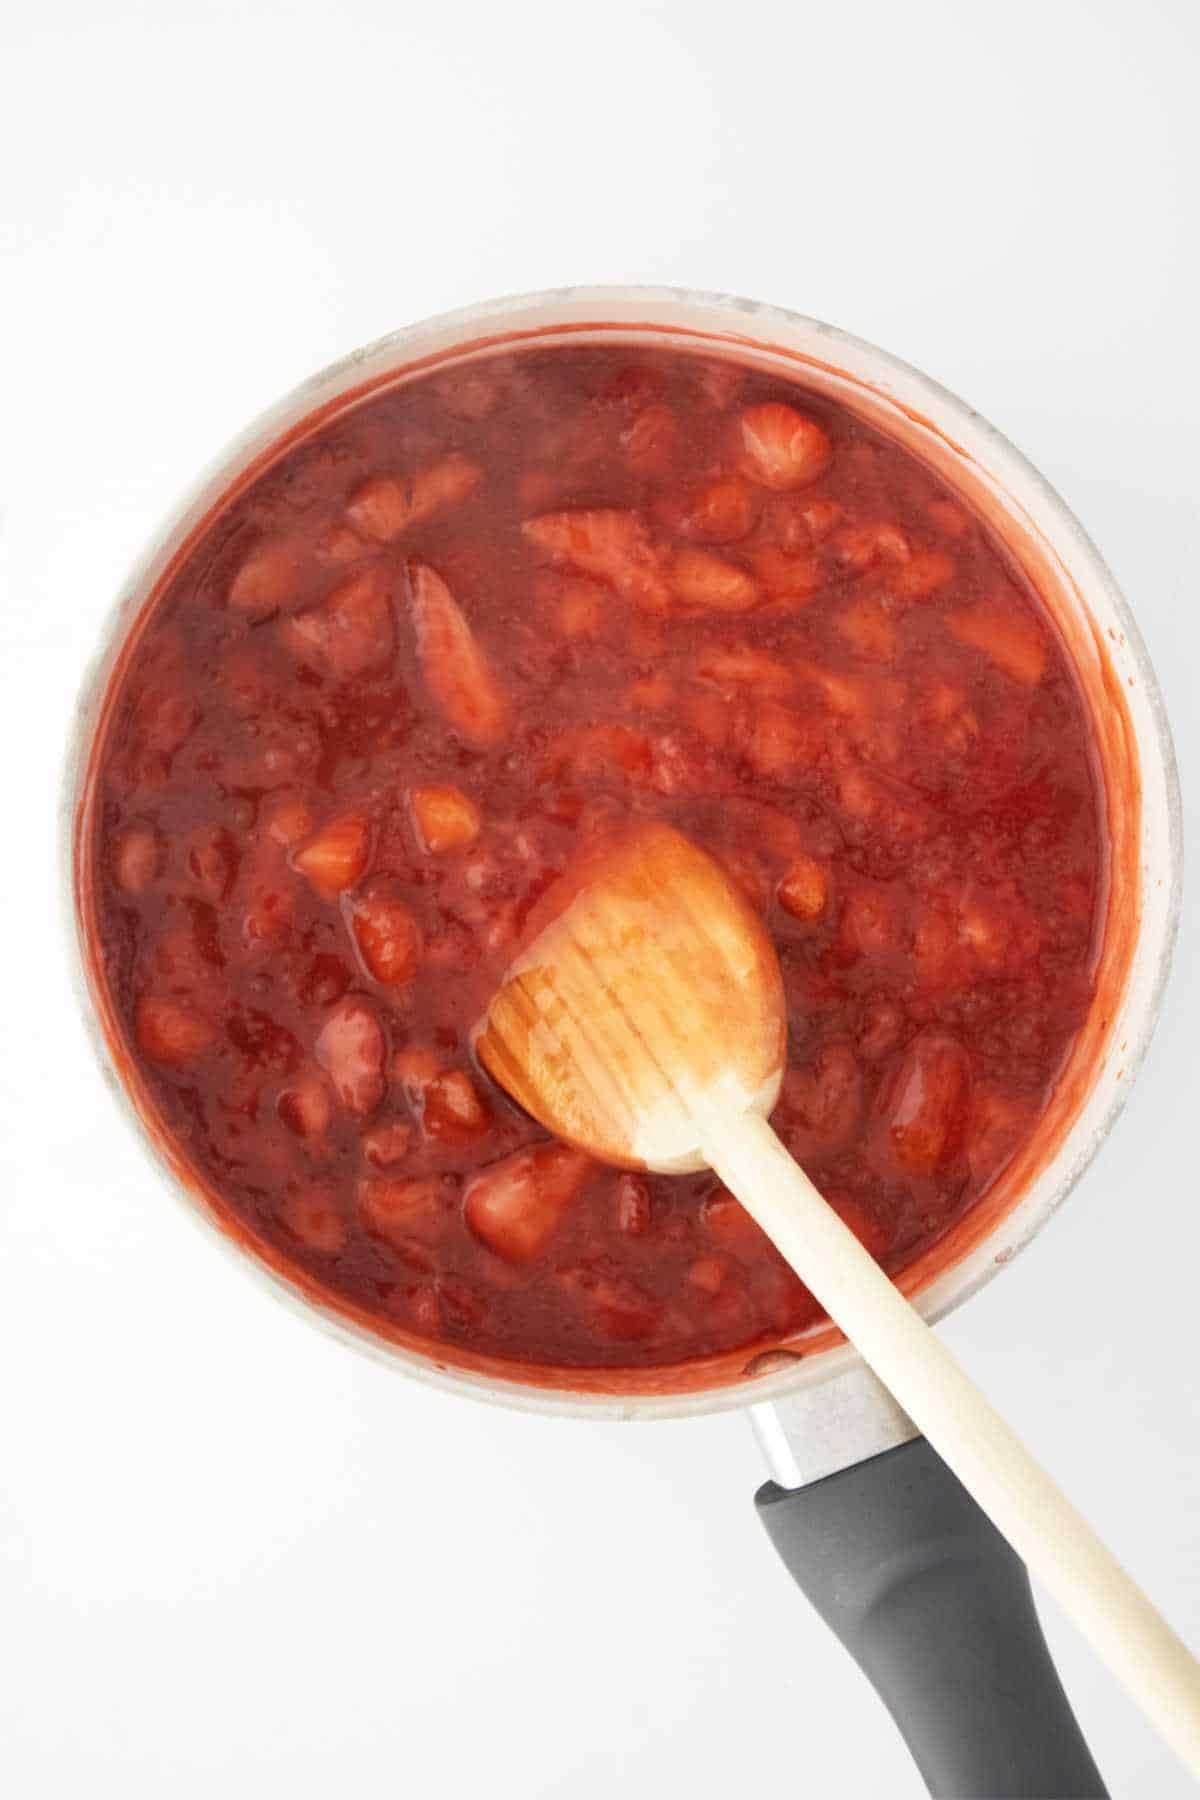 thickened strawberry jam cooking in a sauce pan.